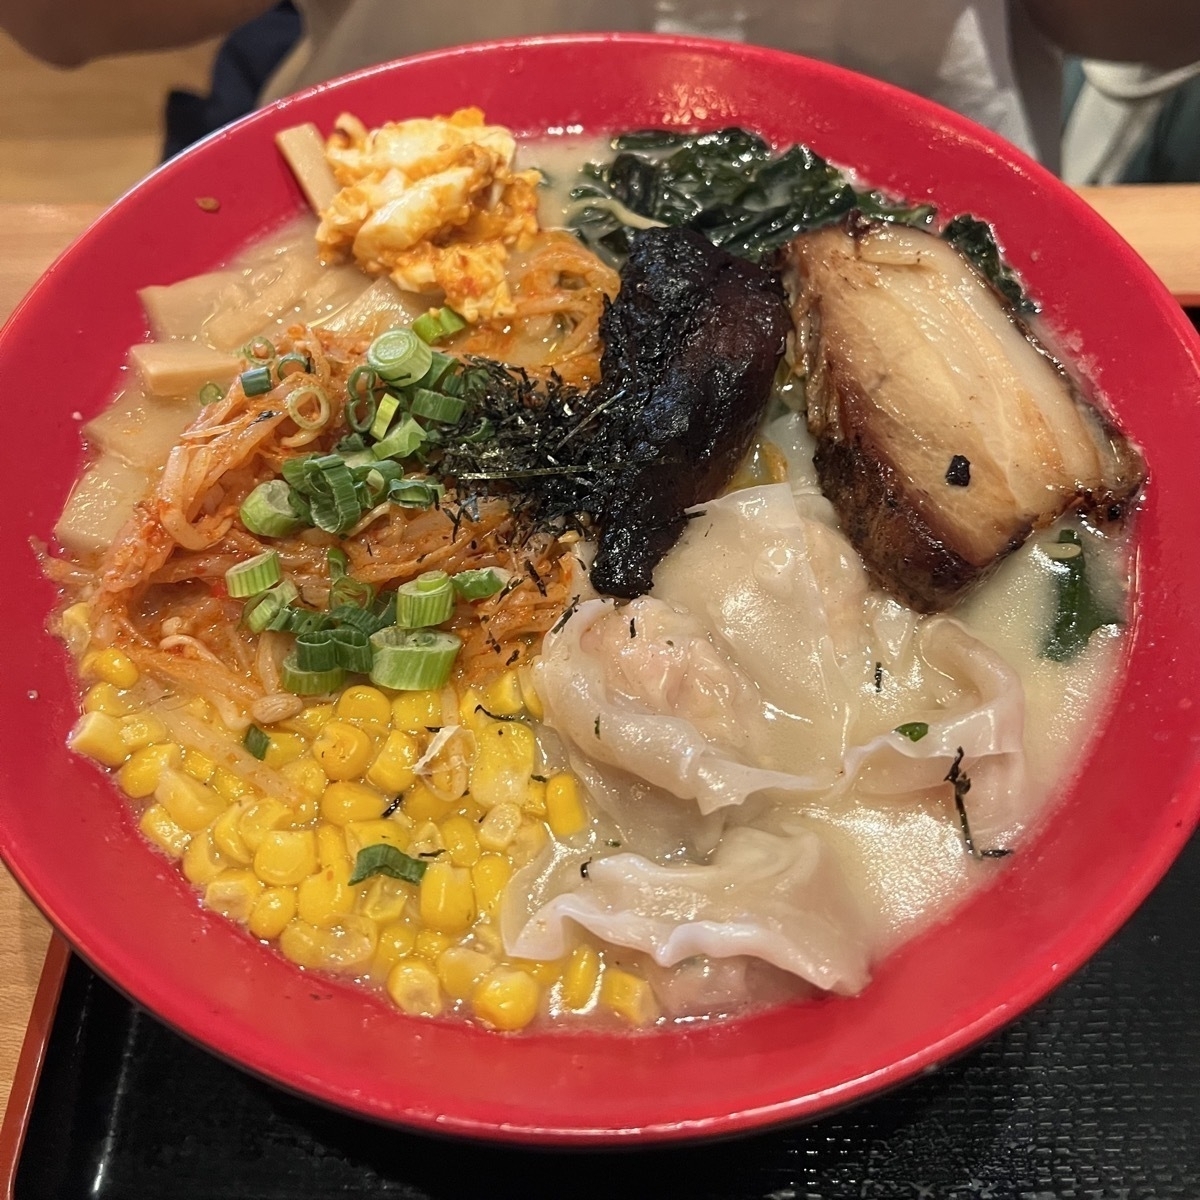 Ramen in a red bowl with pork, corn, and dumplings.